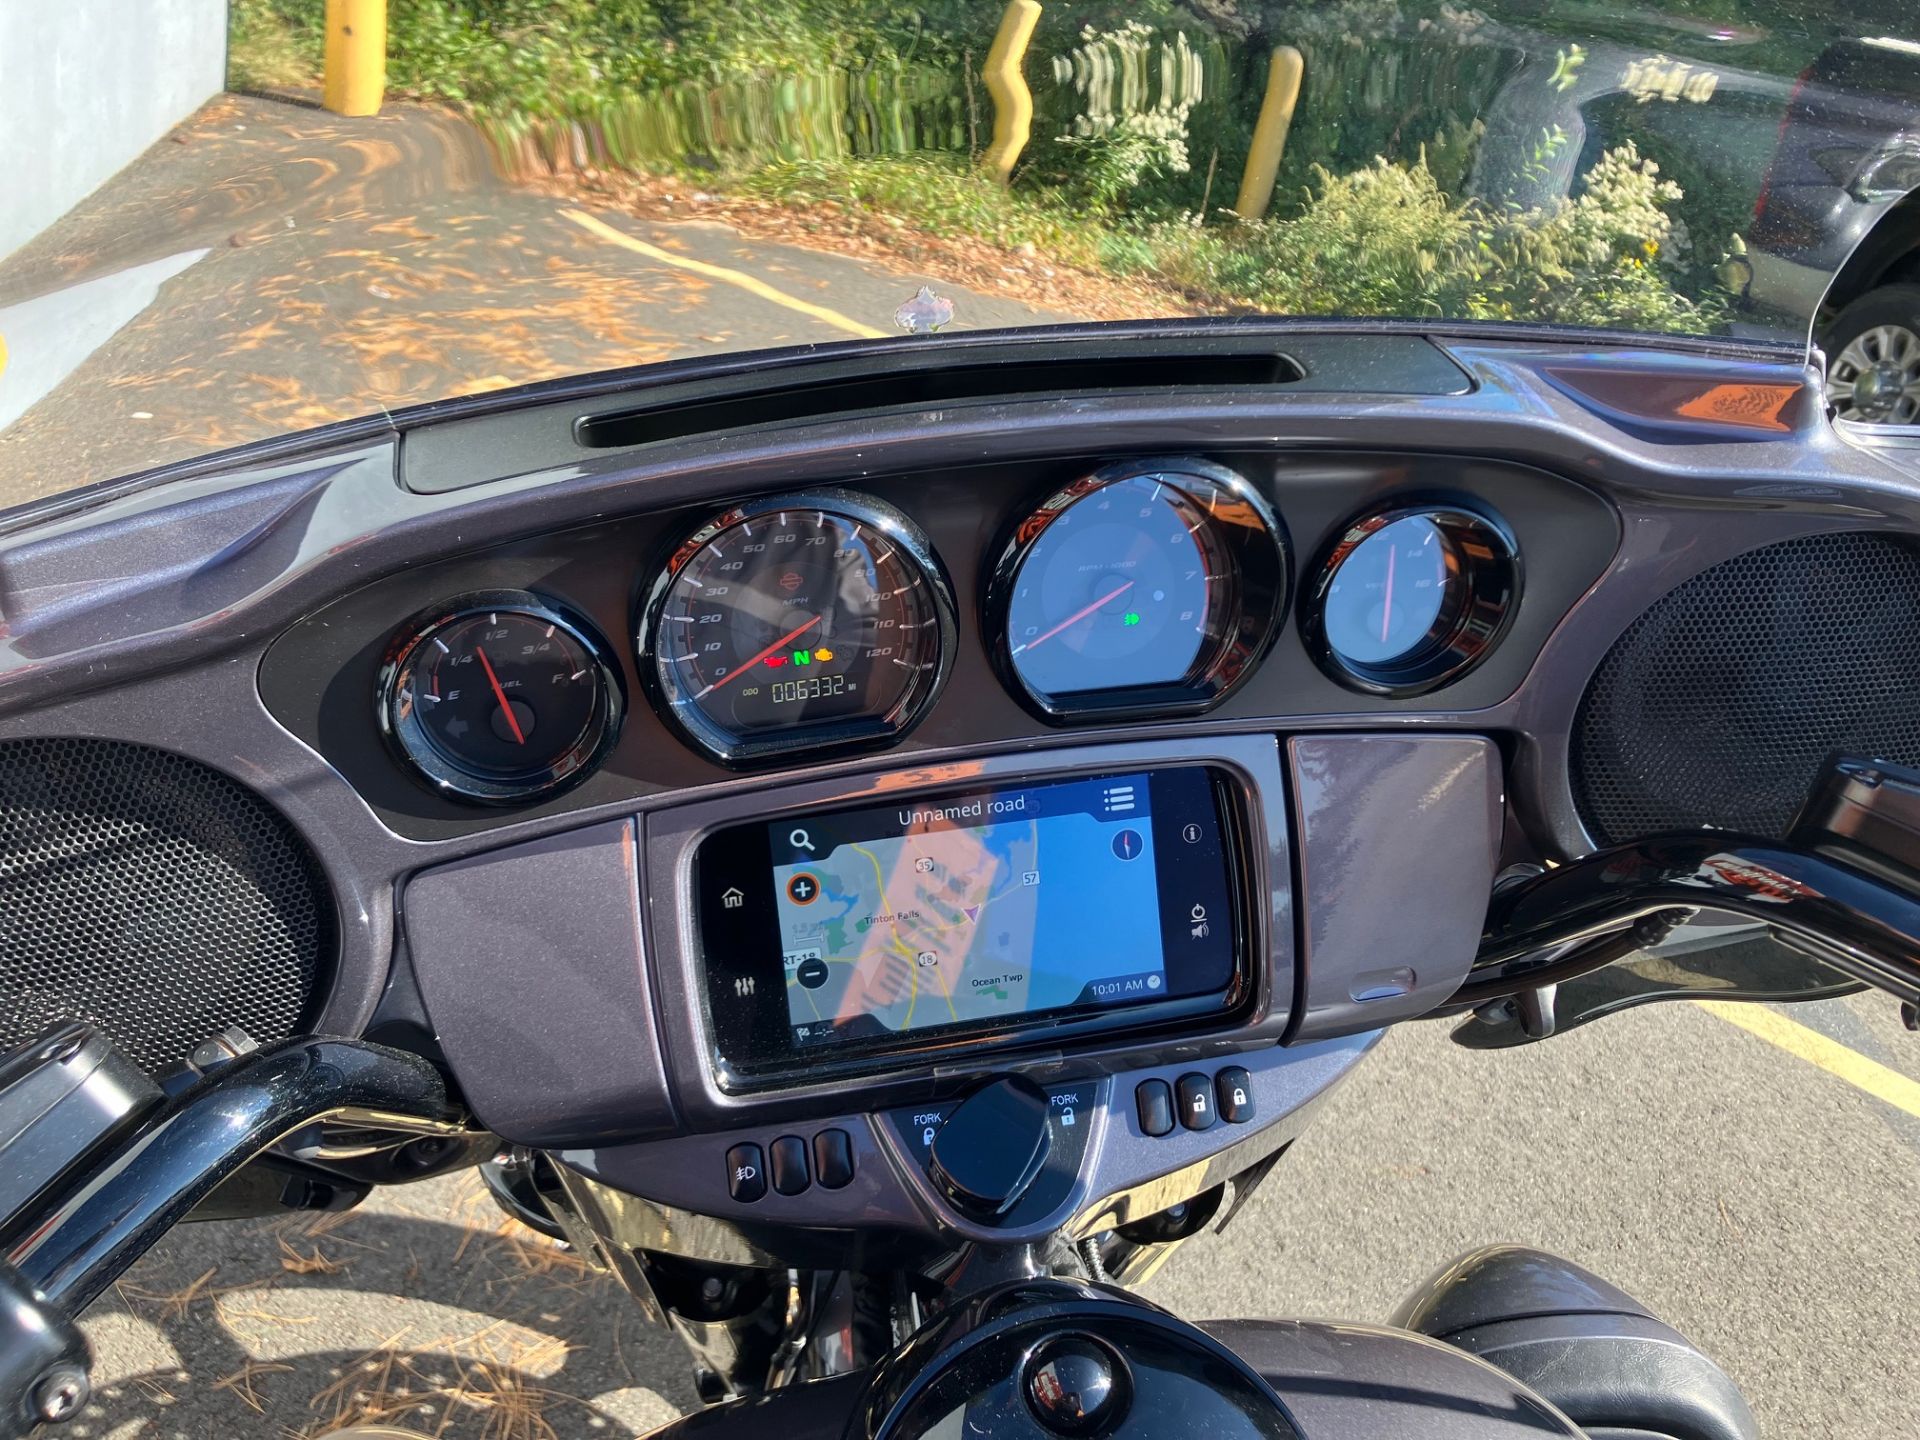 2020 Harley-Davidson CVO ULTRA LIMITED in West Long Branch, New Jersey - Photo 11